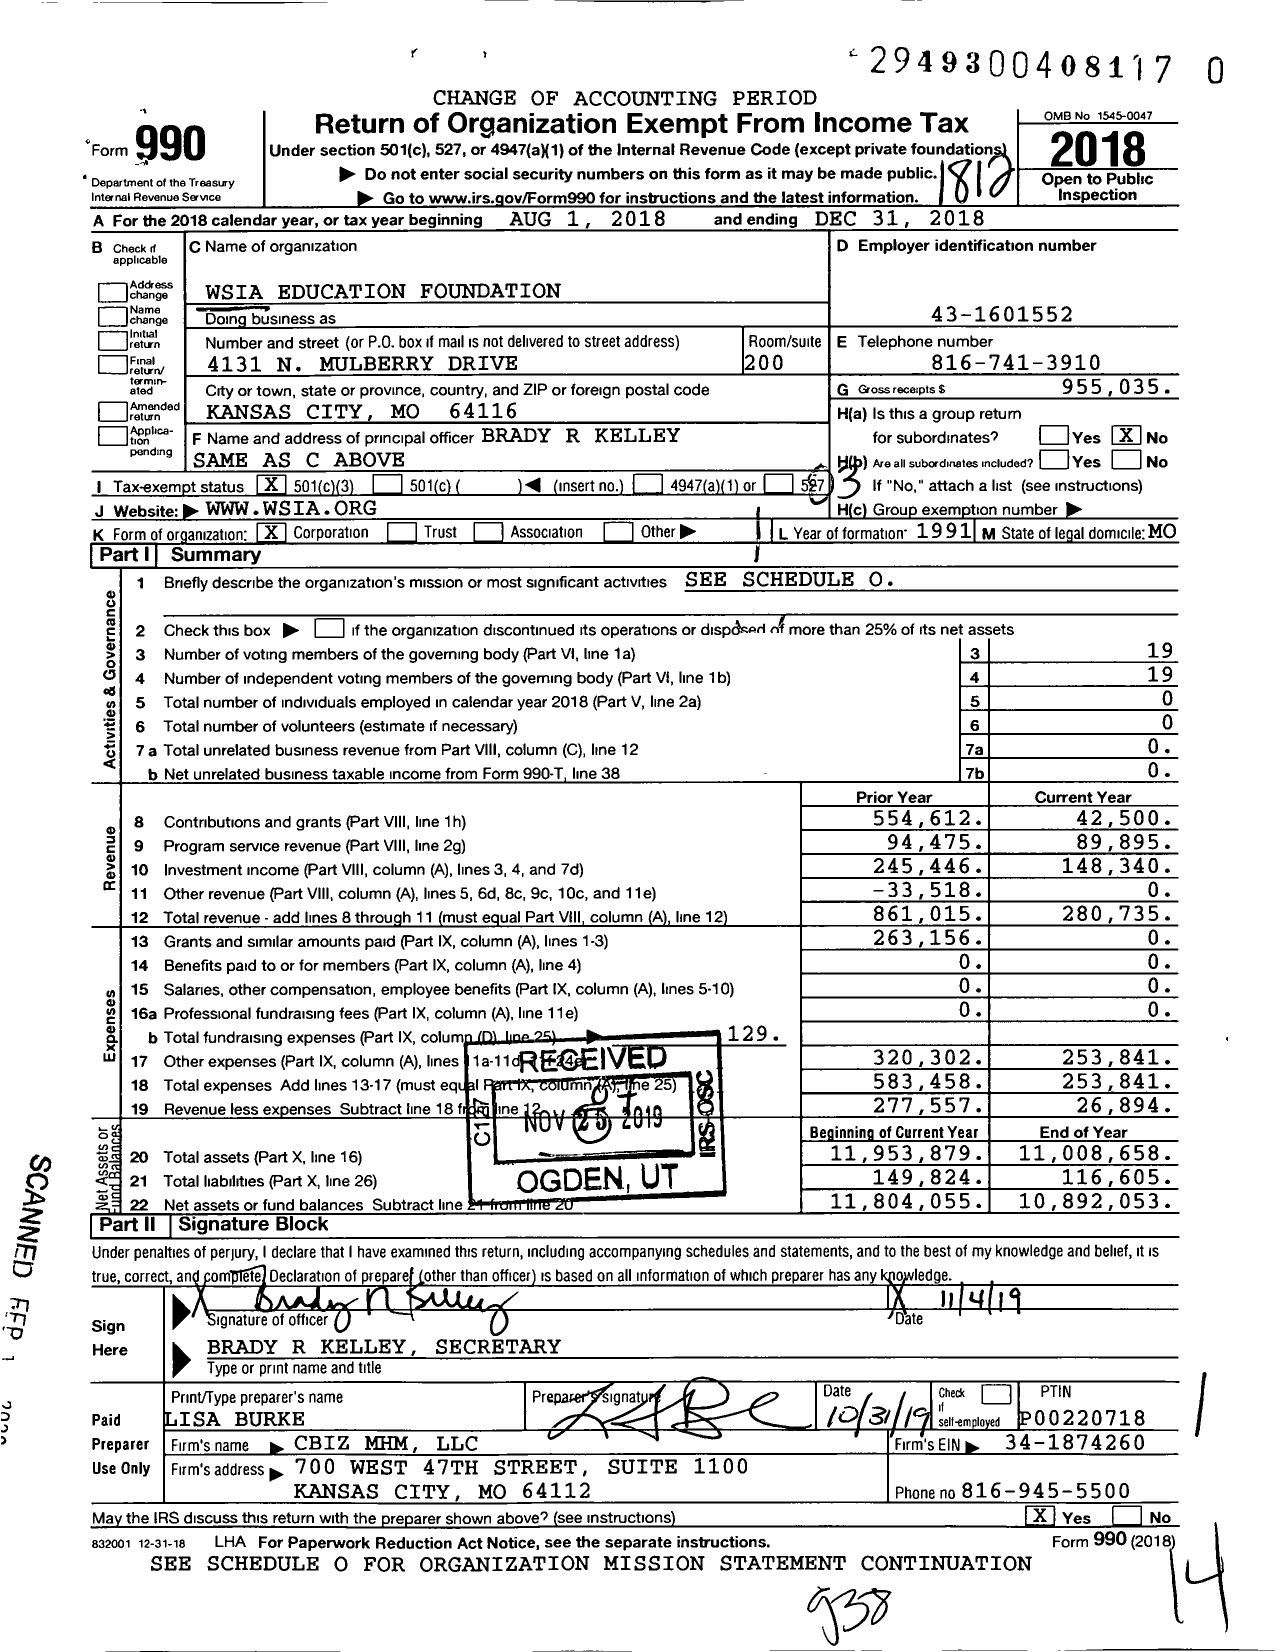 Image of first page of 2018 Form 990 for Wsia Education FOUNDATION